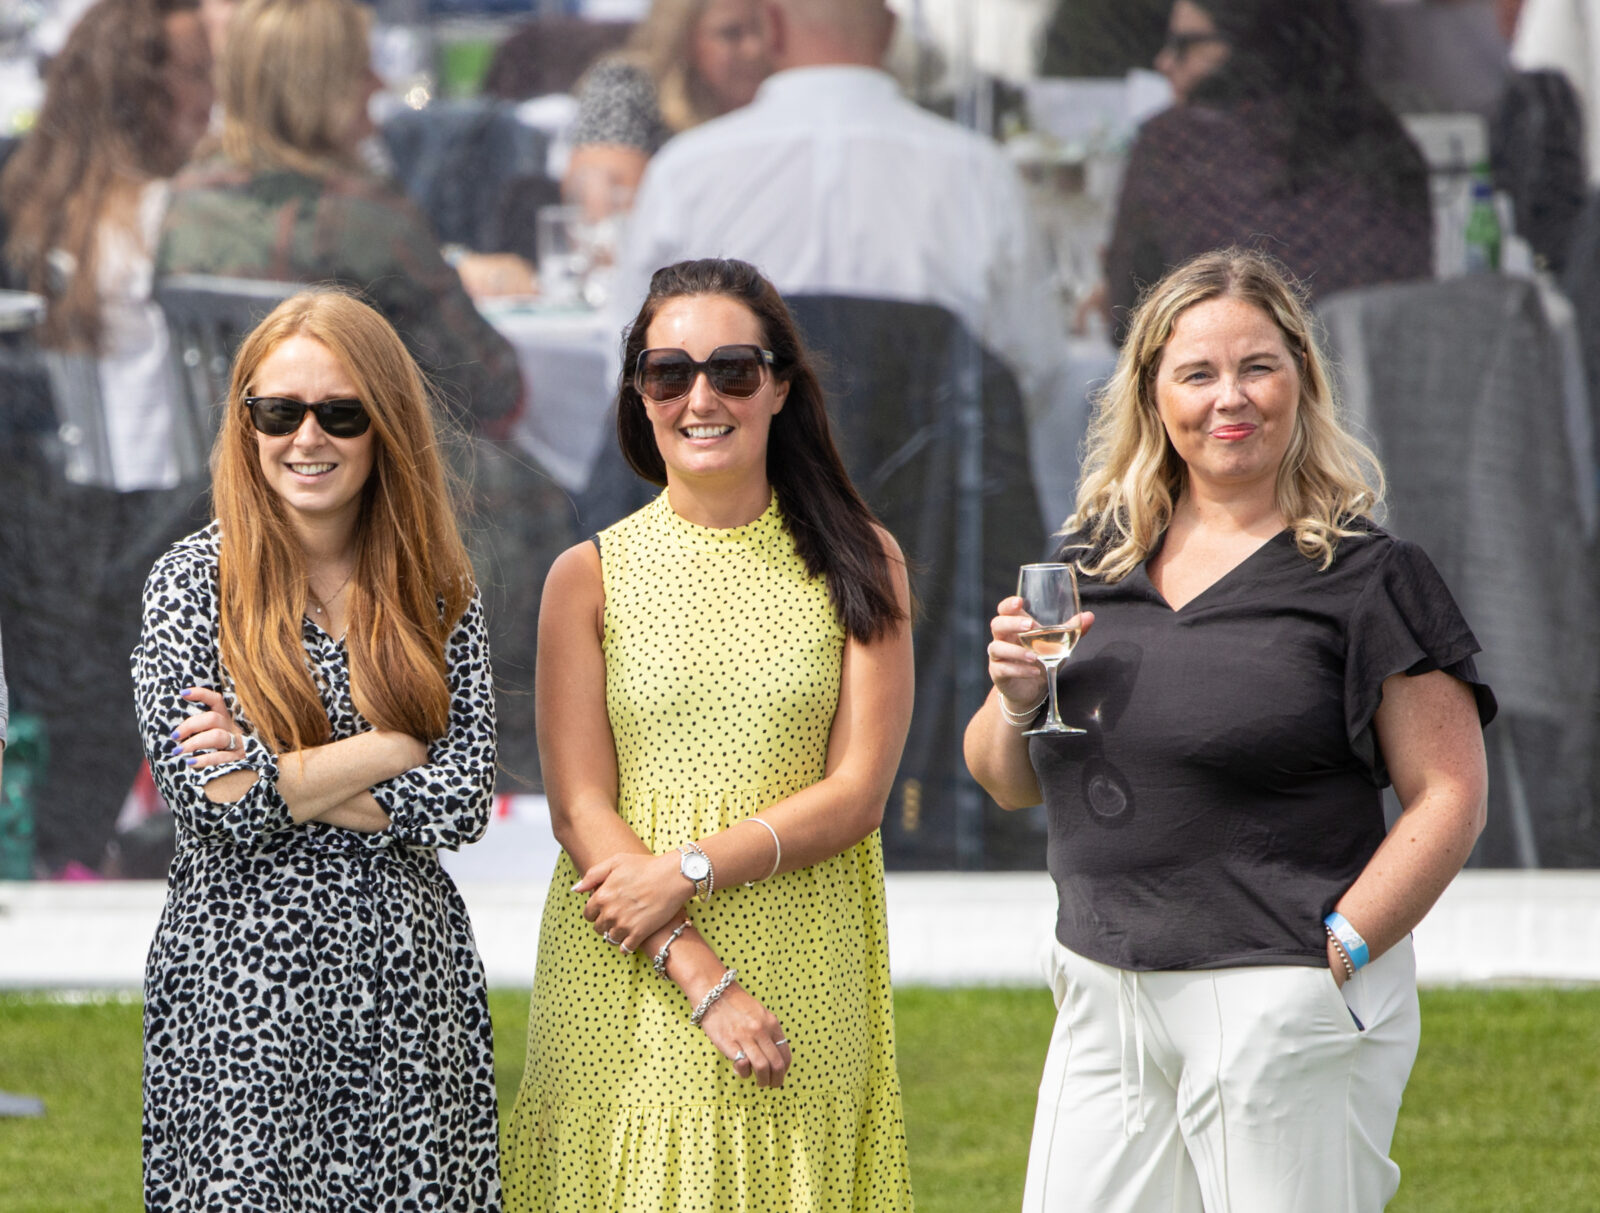 LIVERPOOL, ENGLAND - Thursday, August 19, 2021: Corporate guests enjoy the action during the Liverpool International Tennis Tournament at Liverpool Cricket Club. (Pic by David Rawcliffe/Propaganda)